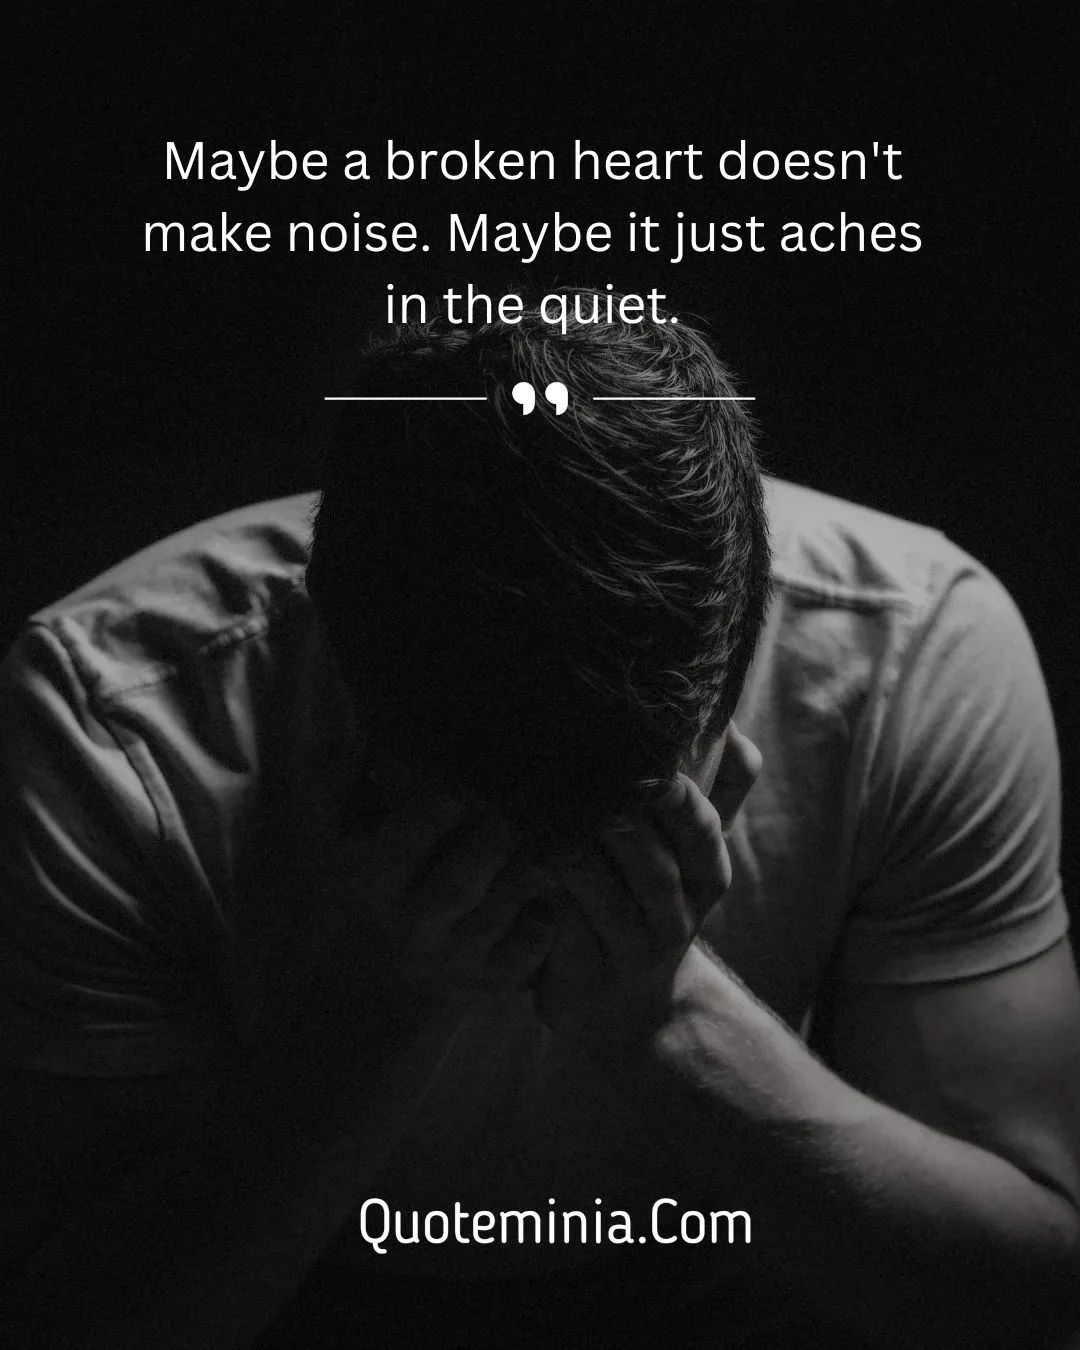 Suffer in Silence Quotes for Instagram Image 2